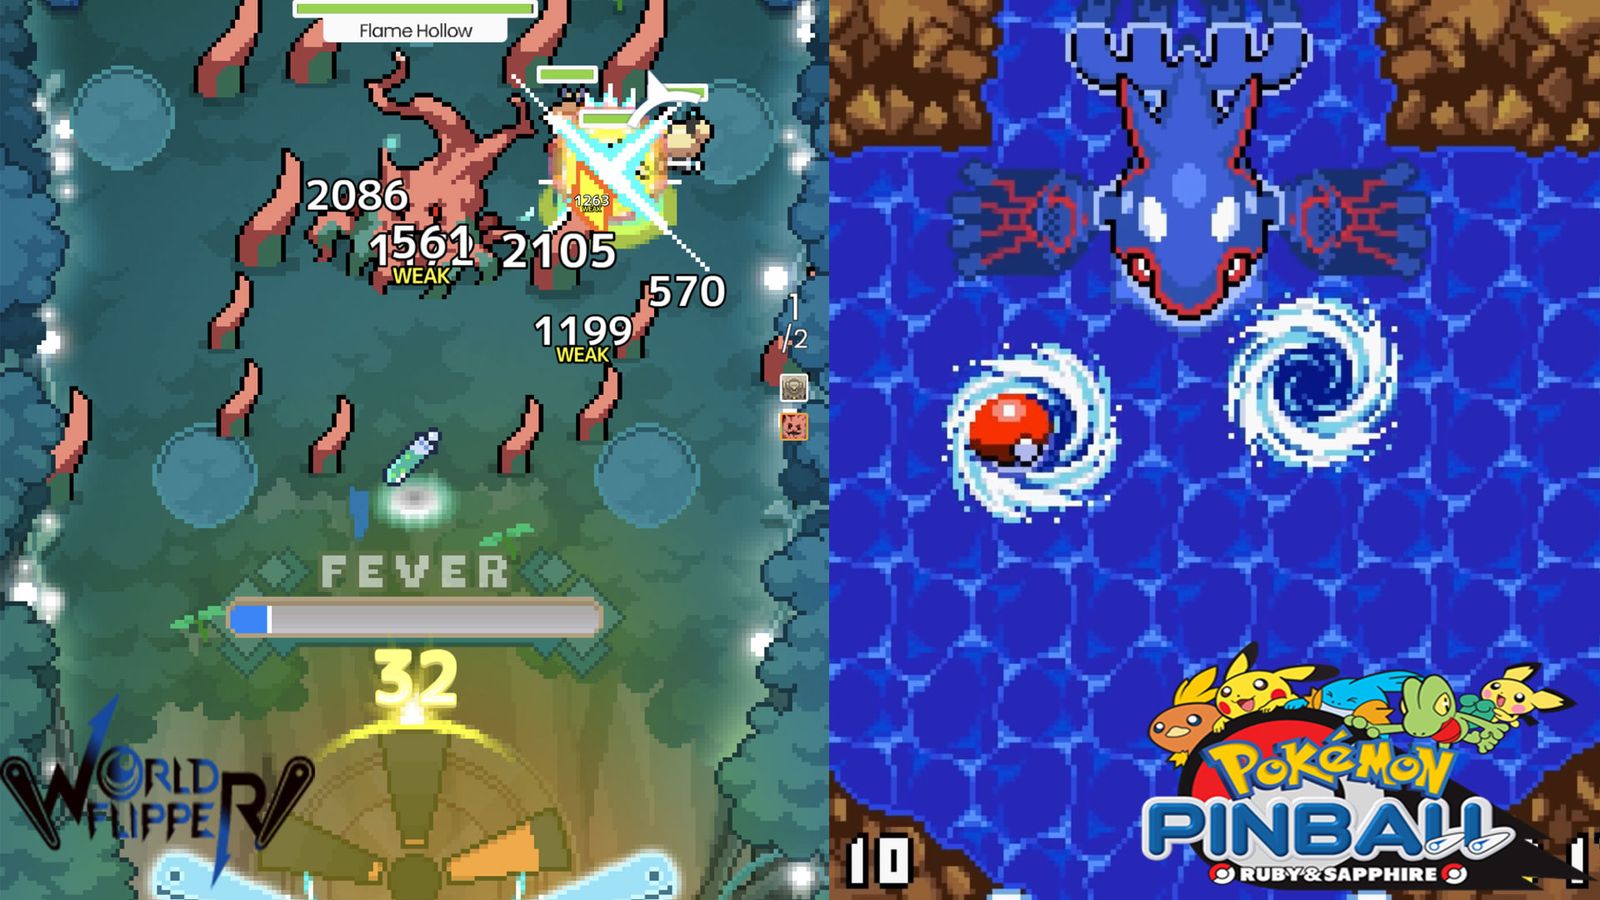 A side-by-side comparison of boss fights in World Flipper and Pokémon Pinball.